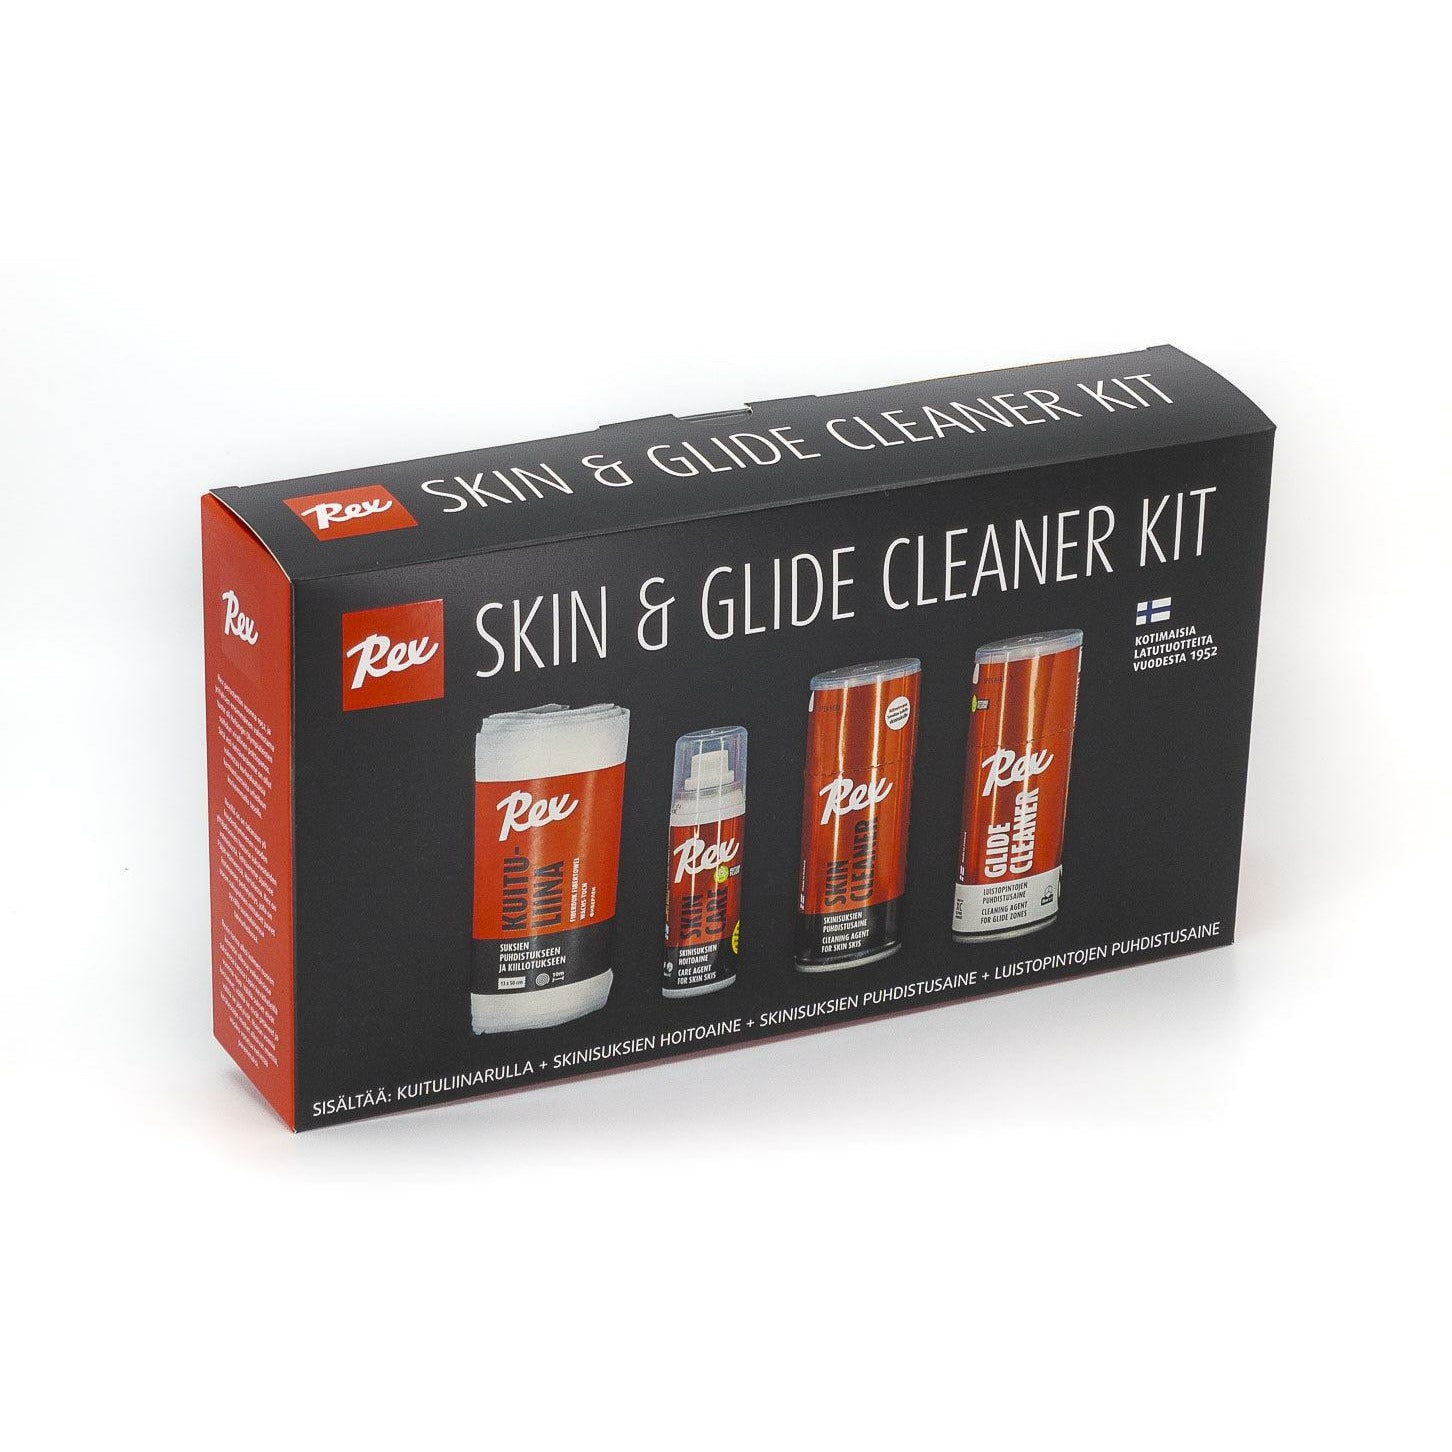 Rex Skin and Glide Cleaner Kit - Pioneer Midwest